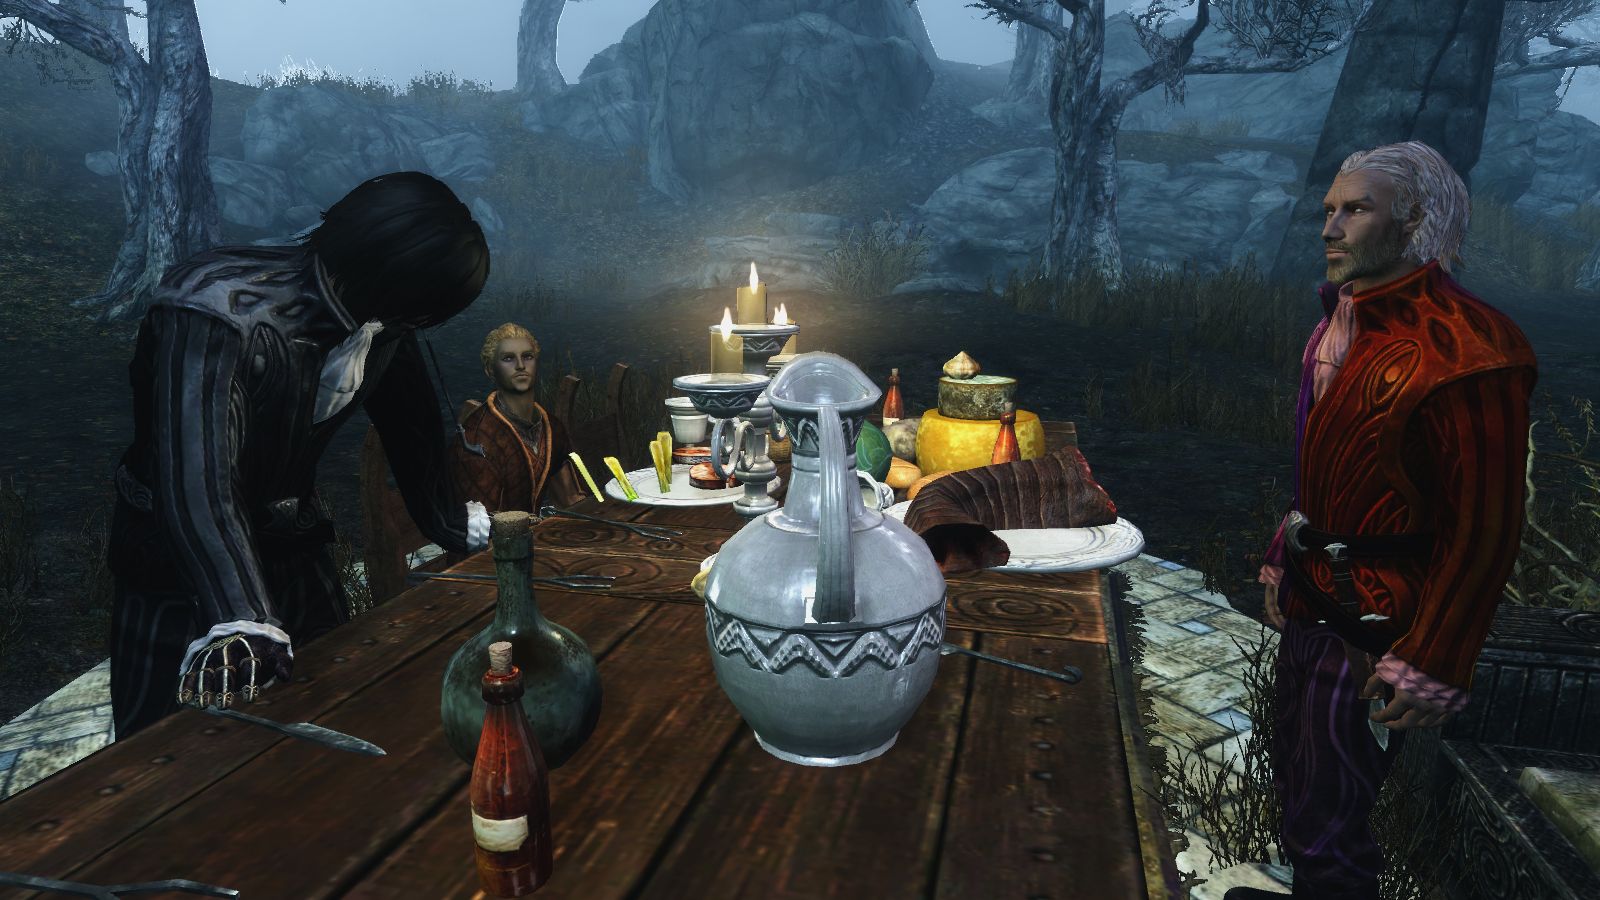 Three Skyrim characters are around a table, two standing and one sitting, the table is covered in food, candles, bottles and pitchers.